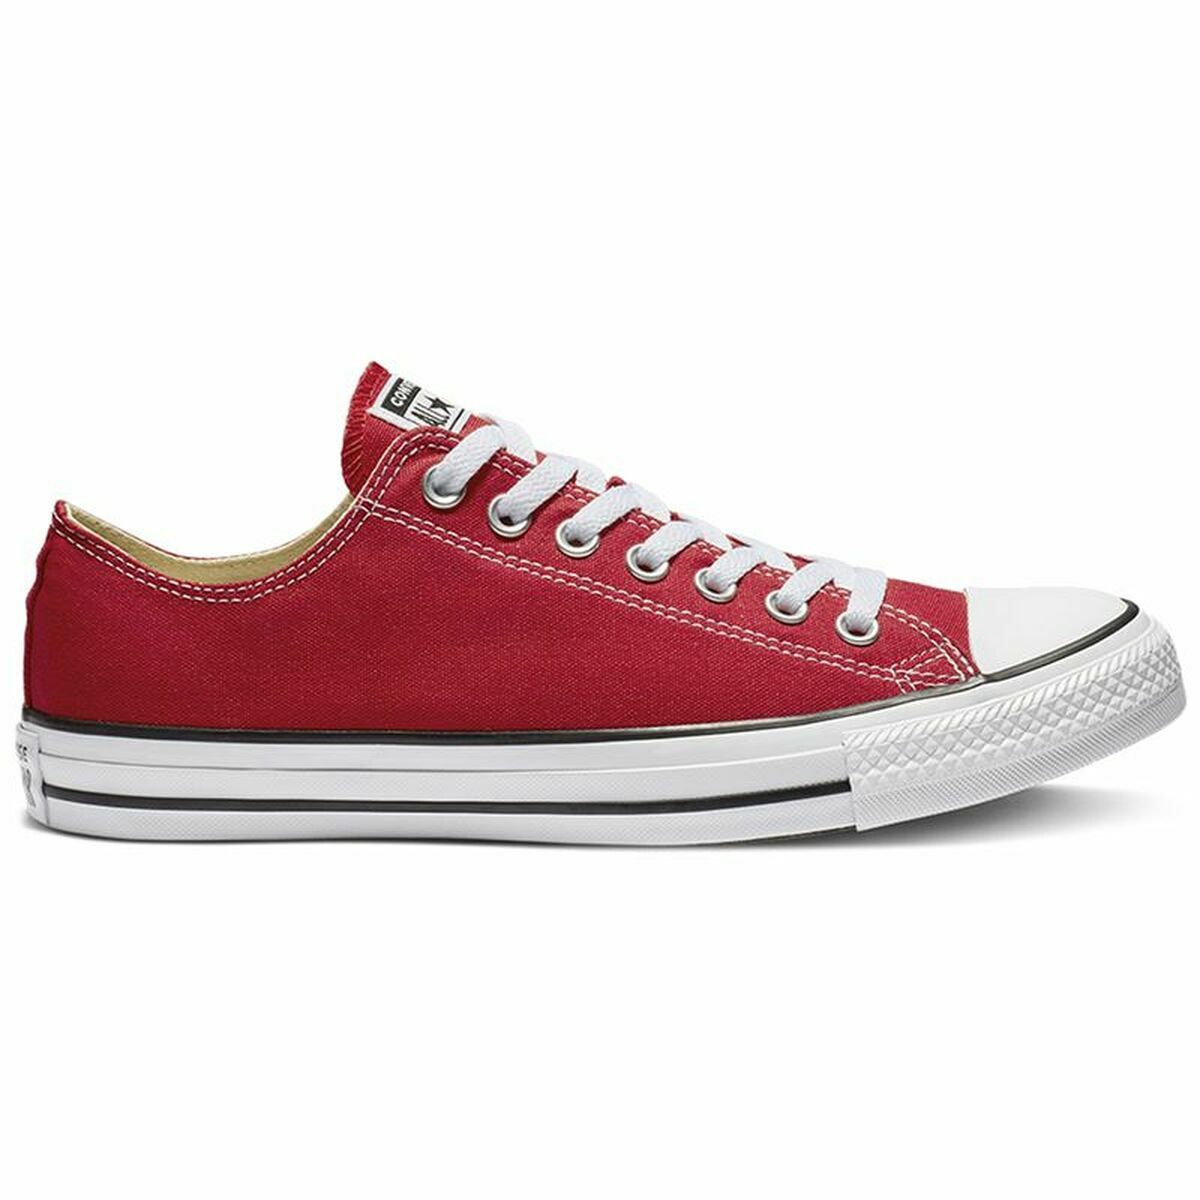 Sports Trainers For Women Converse Chuck Taylor All Star Classic Red-Fashion | Accessories > Clothes and Shoes > Sports shoes-Converse-Urbanheer